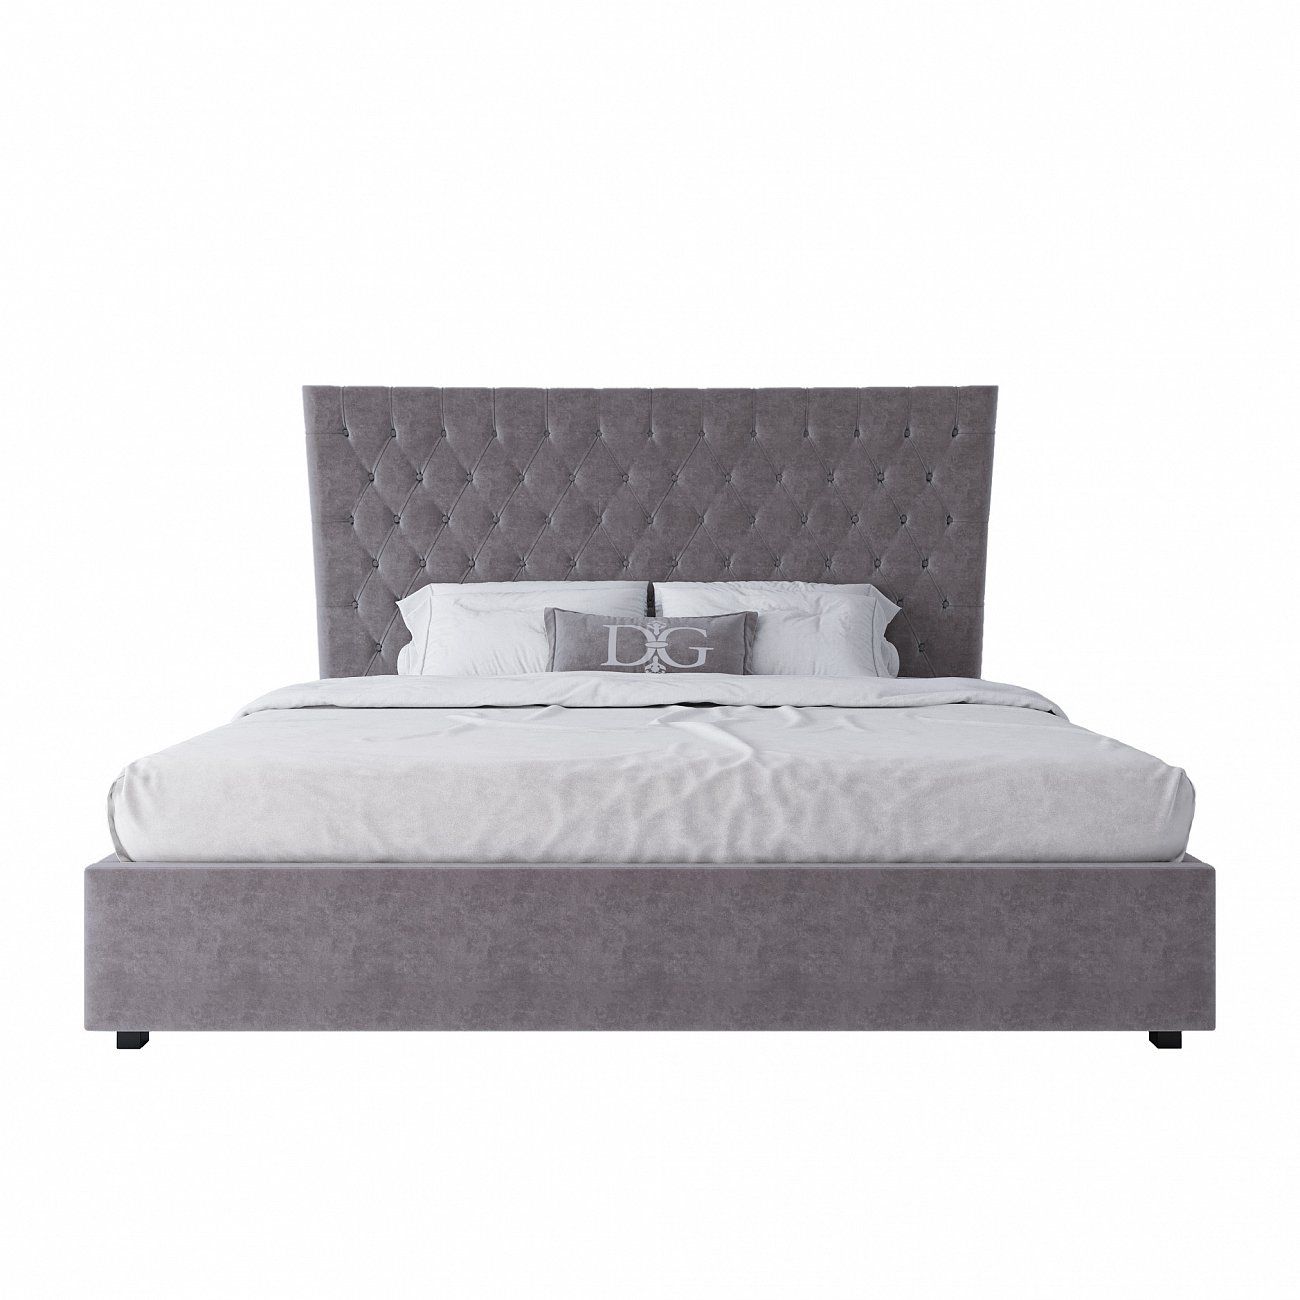 The bed is large 200x200 QuickSand gray-beige